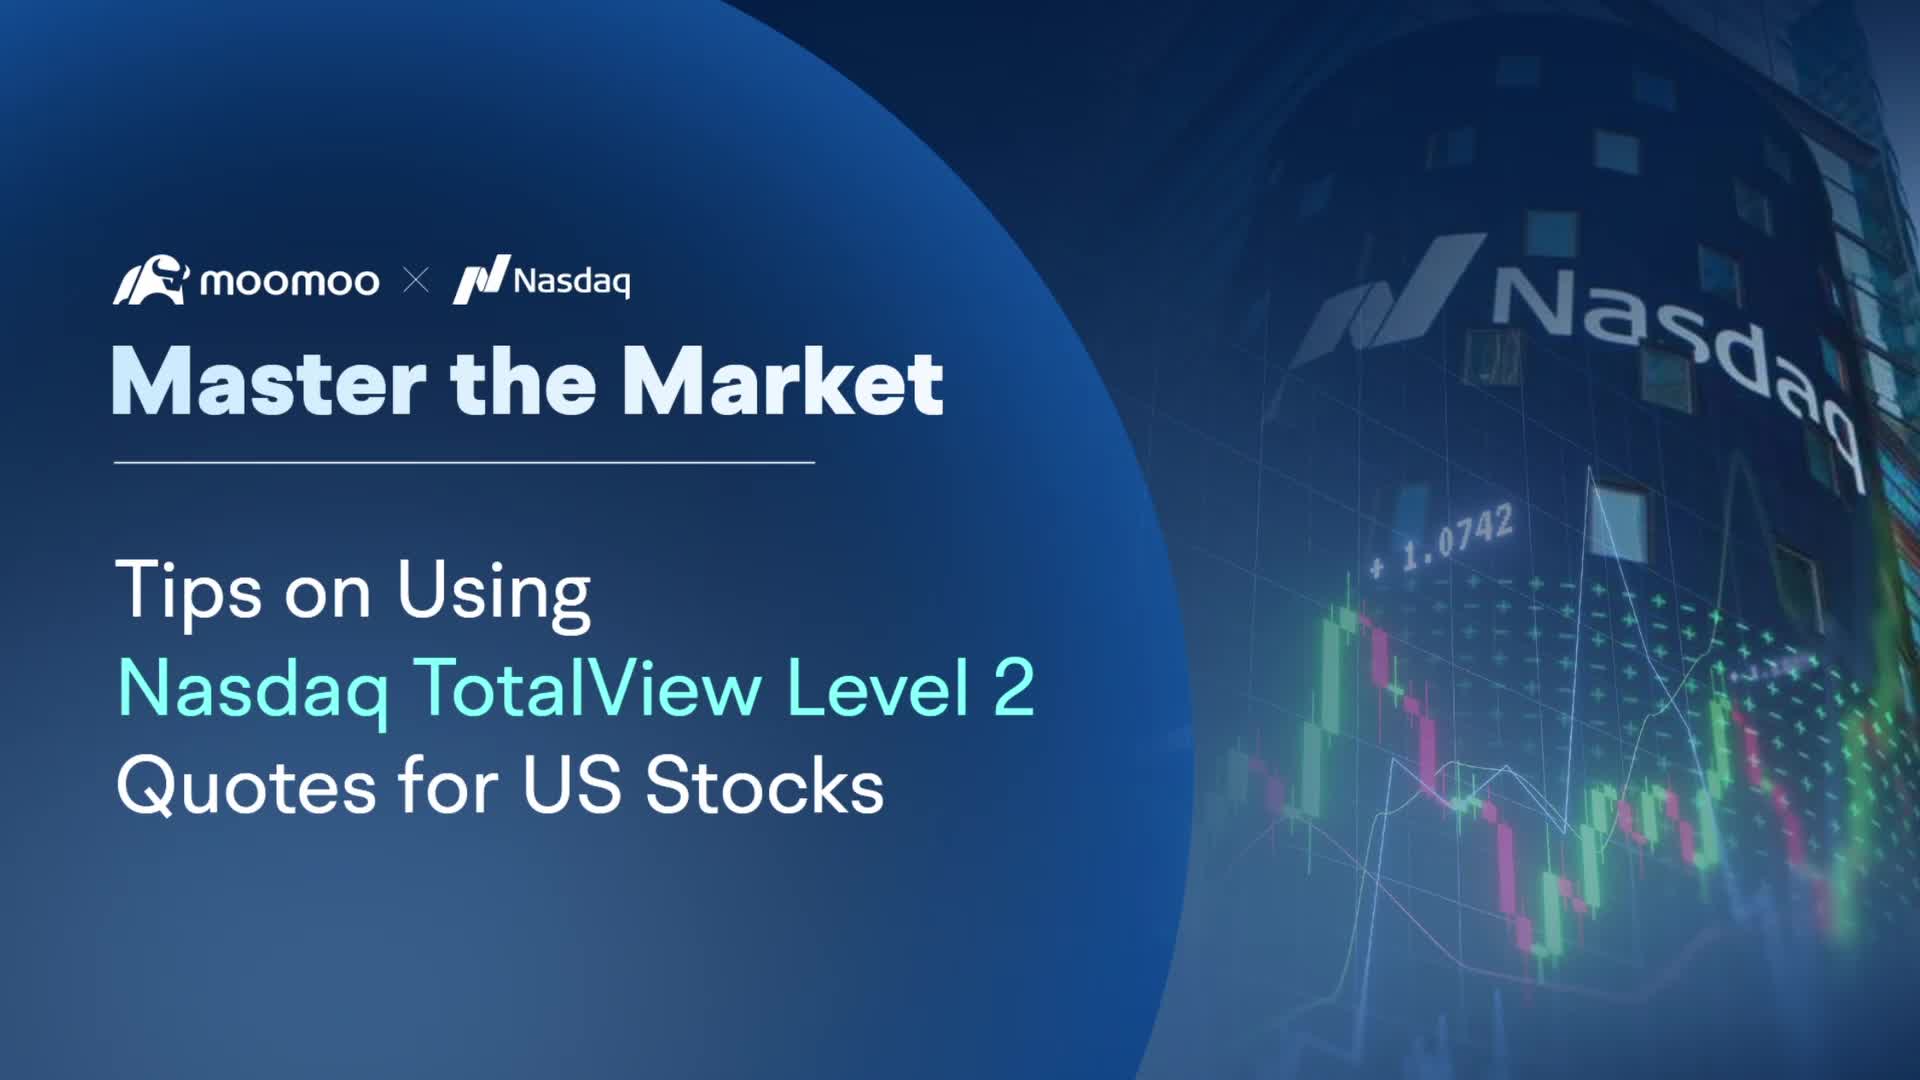 Step by Step: Tips on Using Nasdaq TotalView Level 2 Quotes for US Stocks